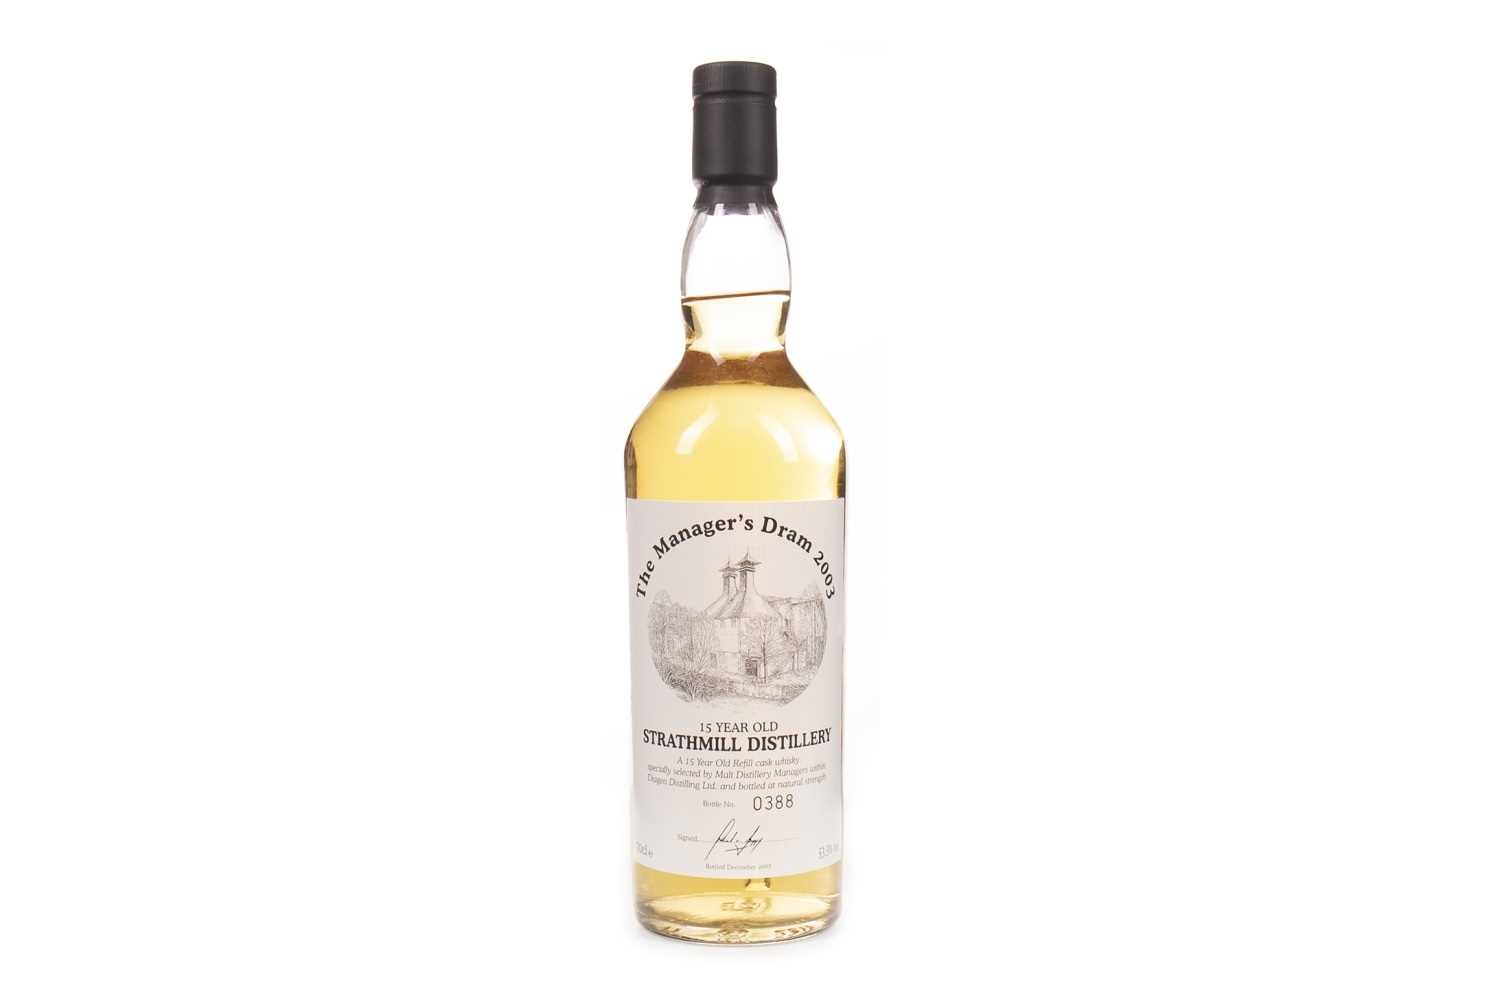 Lot 105 - STRATHMILL MANAGERS DRAM AGED 15 YEARS